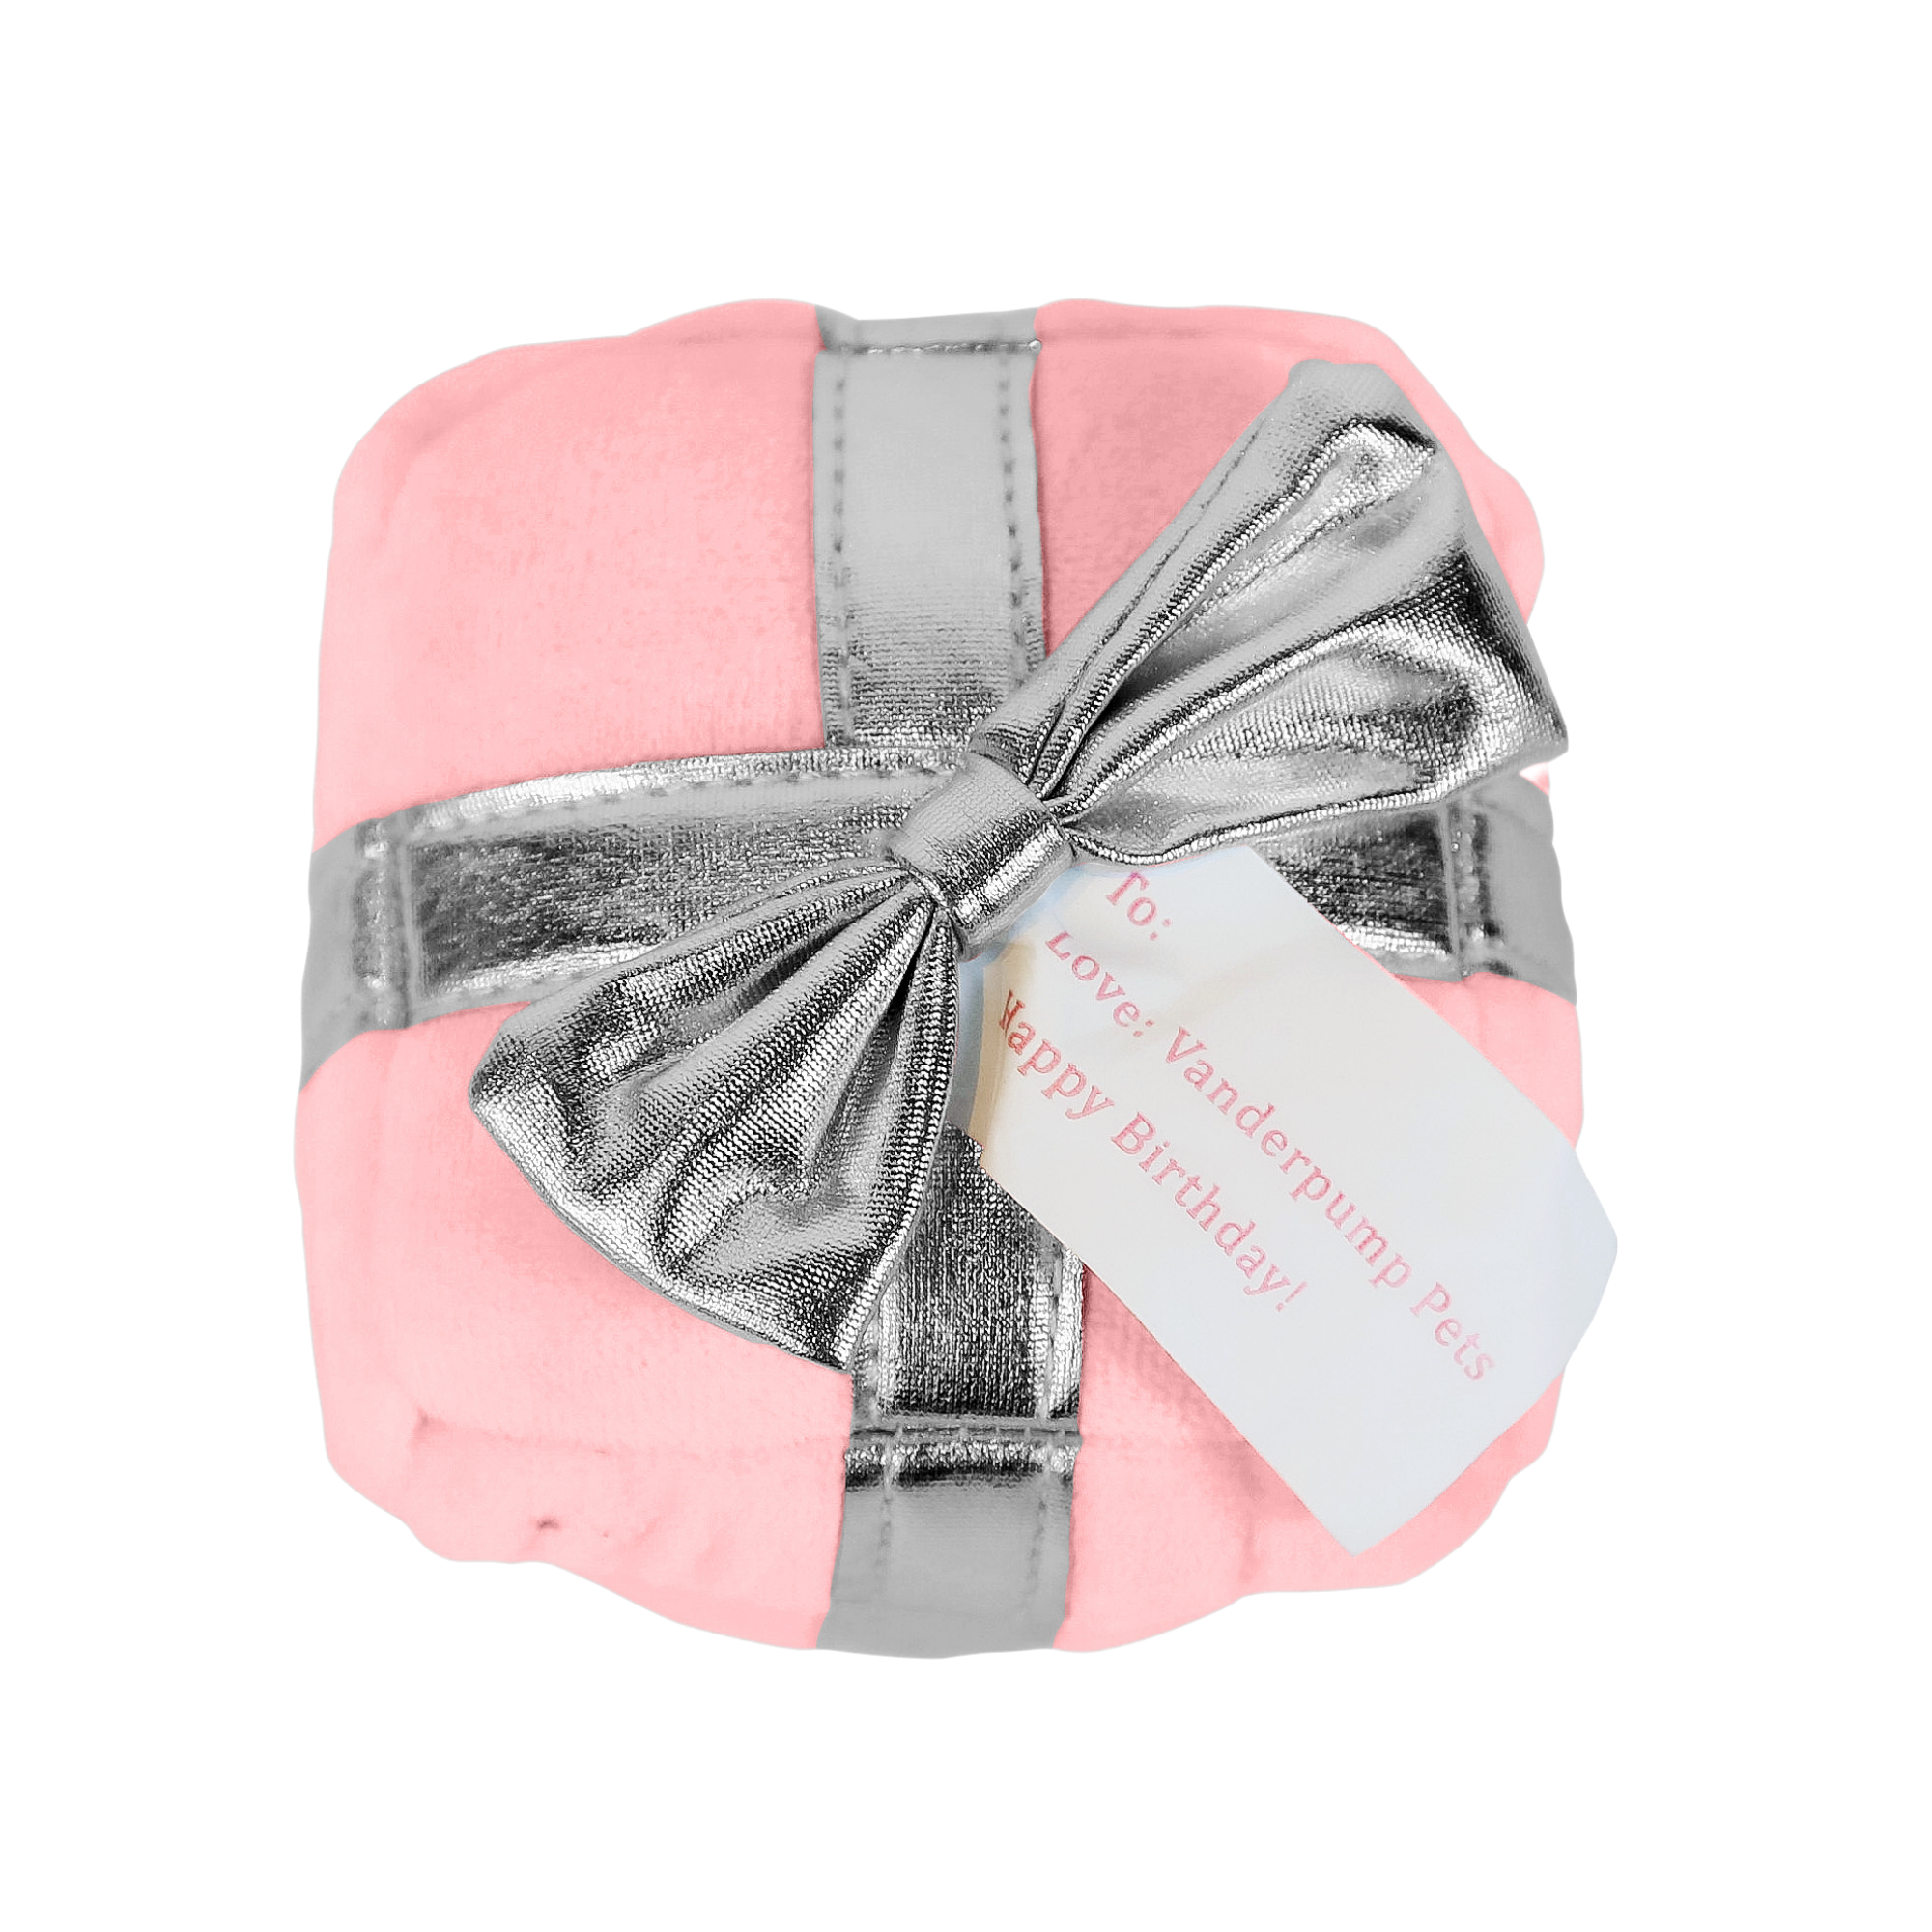 Pet Boutique - Dog Toy - VP Wrapped Gift Toy: Pink by Vanderpump Pets